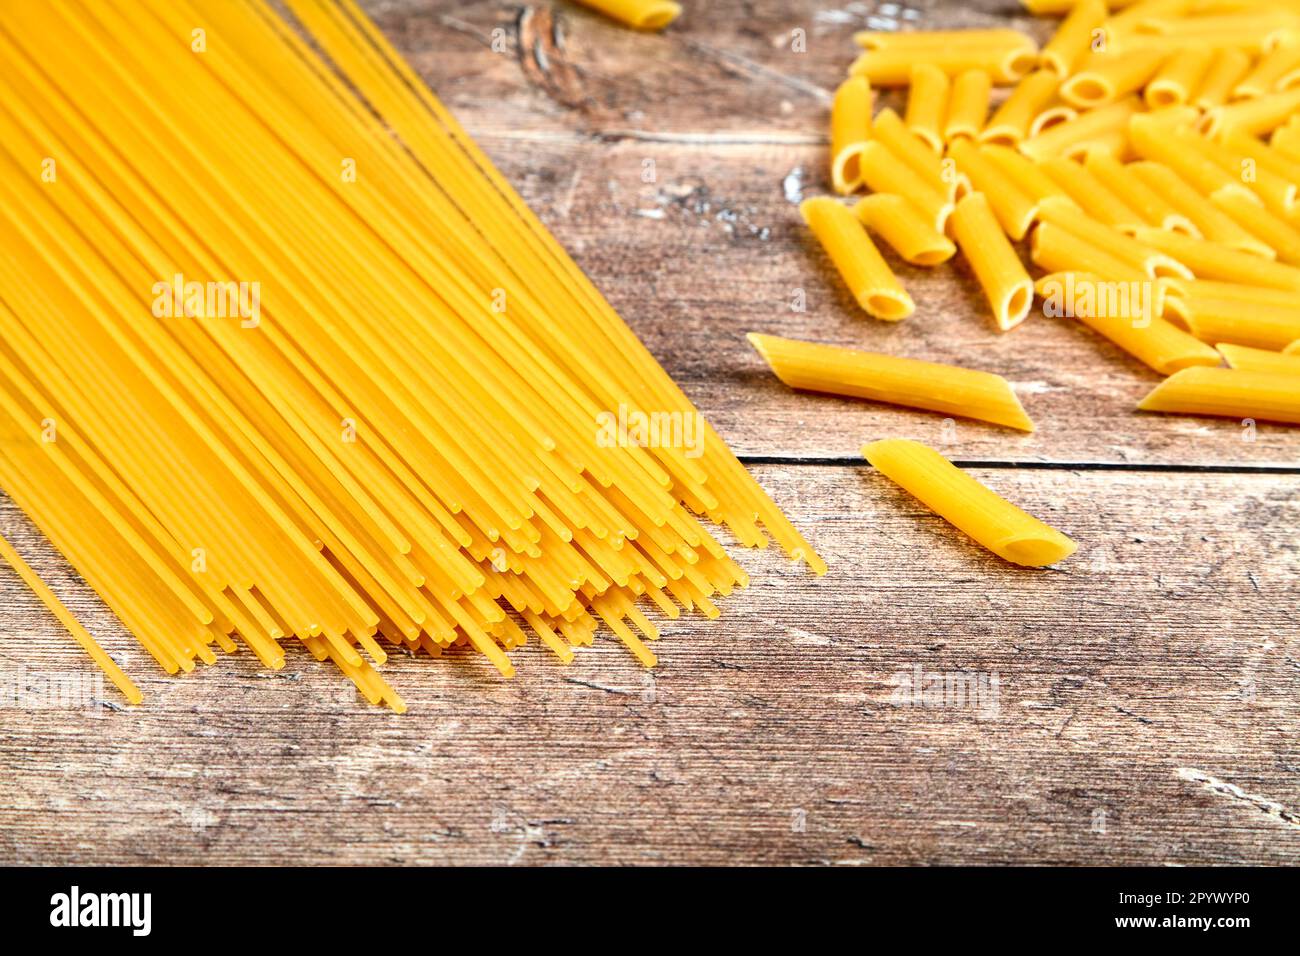 Dry uncooked pasta on a wood  kitchen table Stock Photo